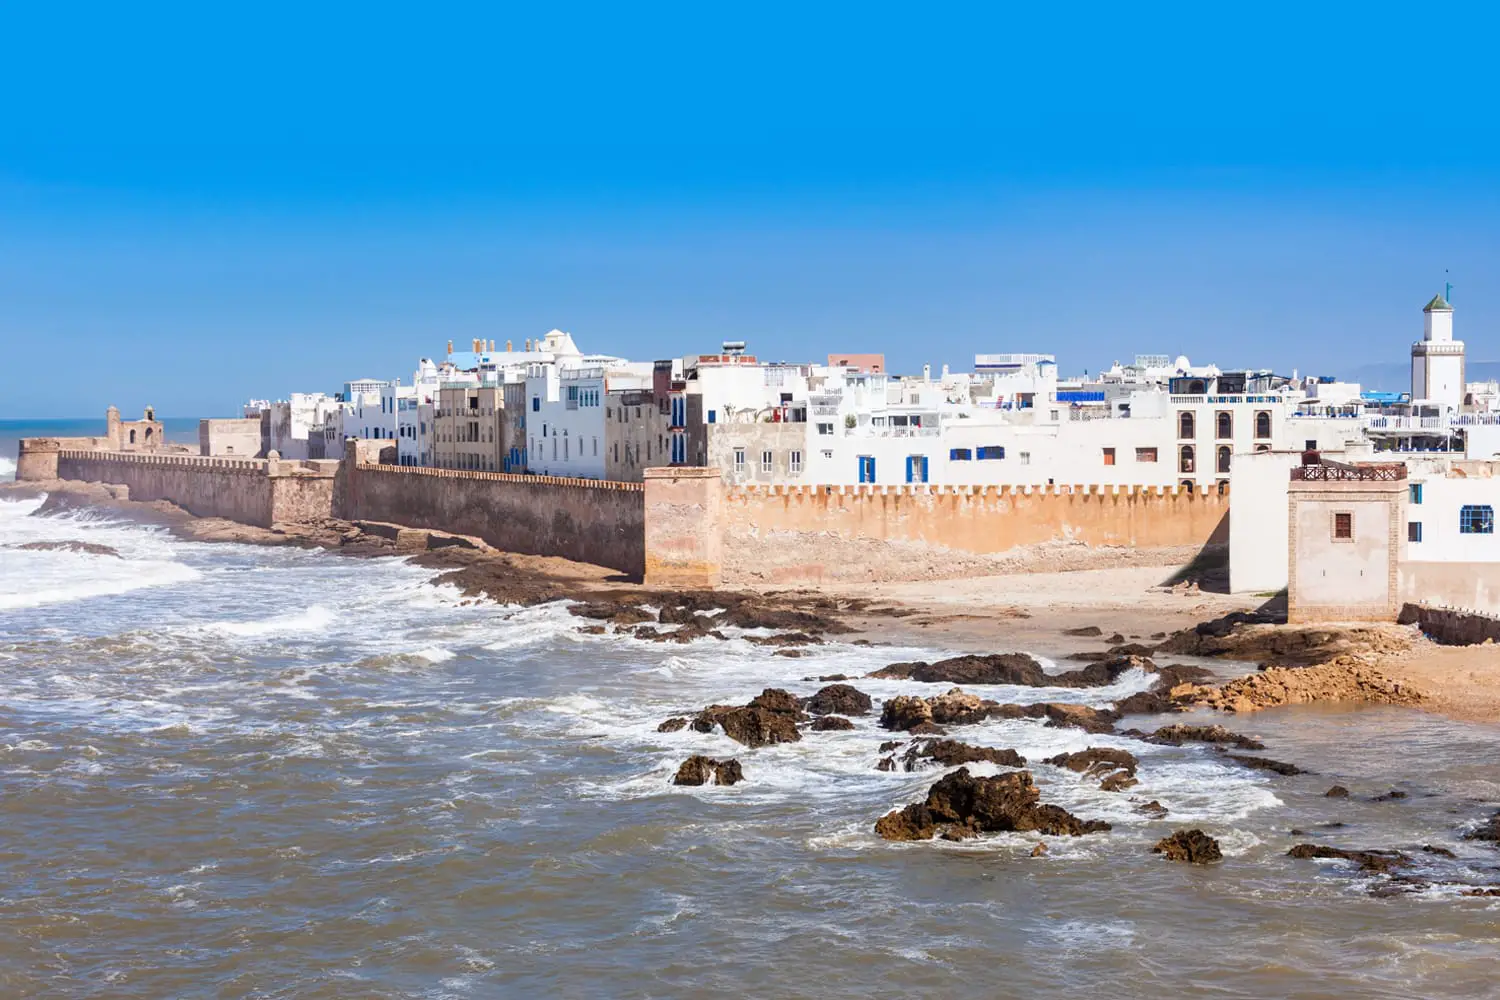 Essaouira Ramparts aerial panoramic view in Essaouira, Morocco. Essaouira is a city in the western Moroccan region on the Atlantic coast.